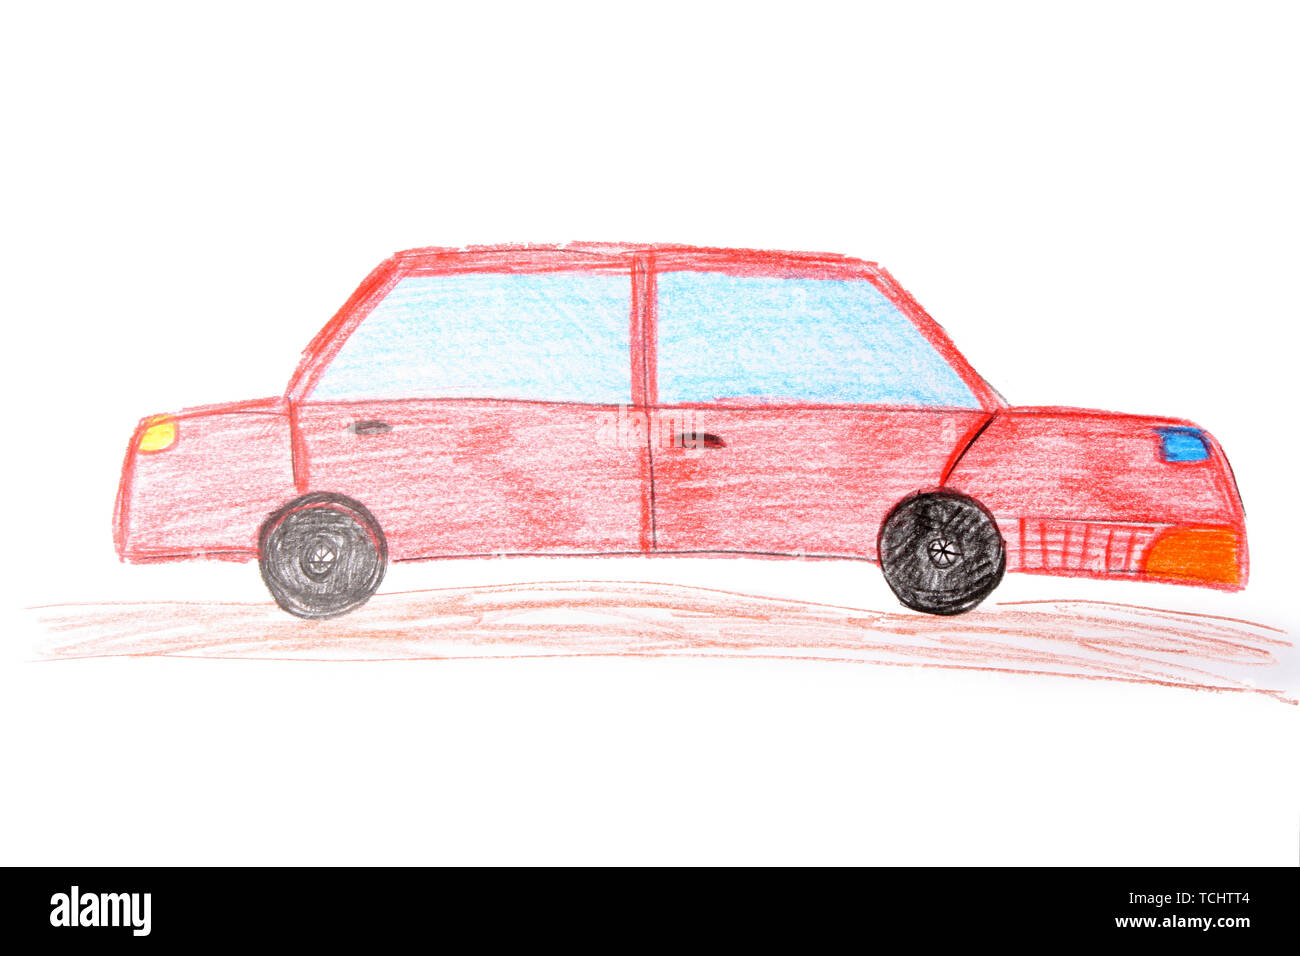 How To Draw Cars for Kids: Super Easy How To Draw Cars Book for